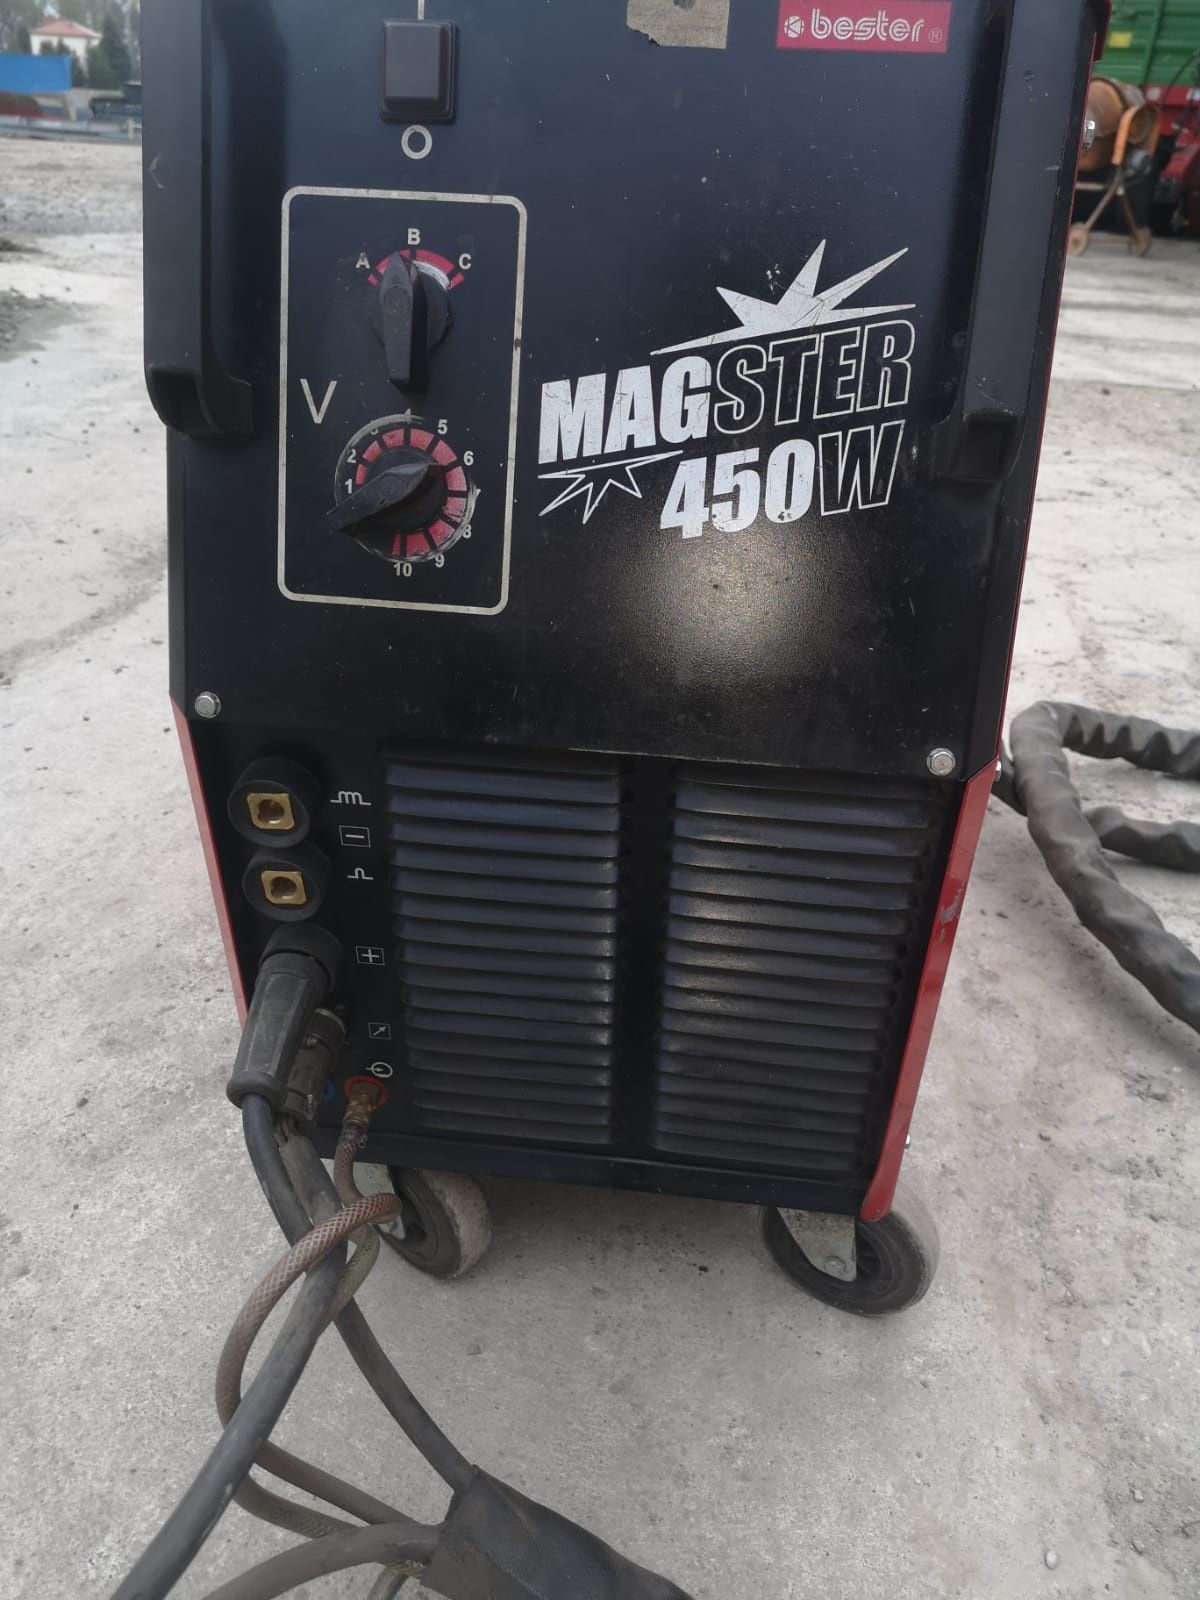 Lincoln Bester magster 450w